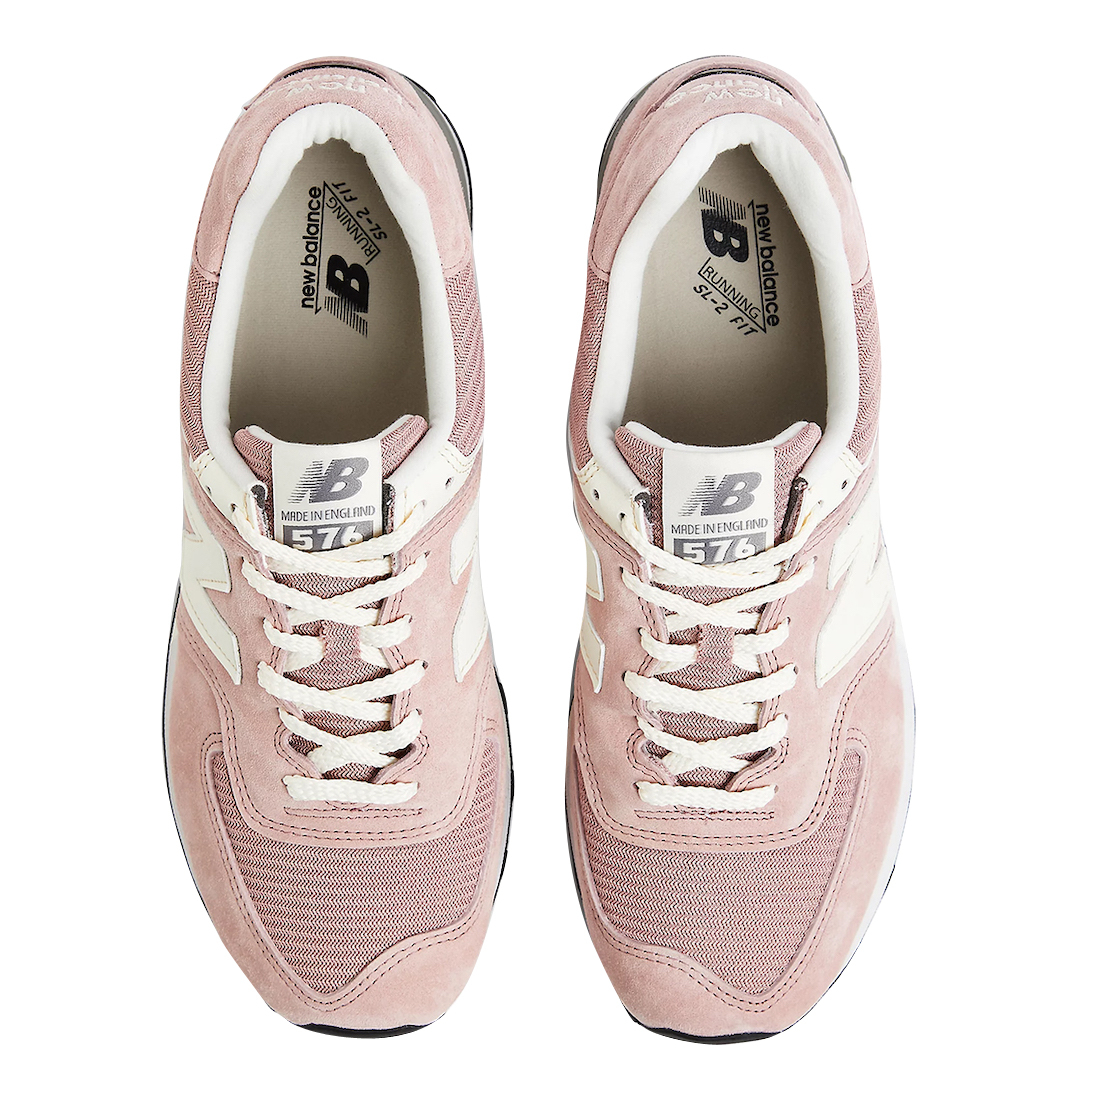 New Balance 576 Made in UK Pale Mauve